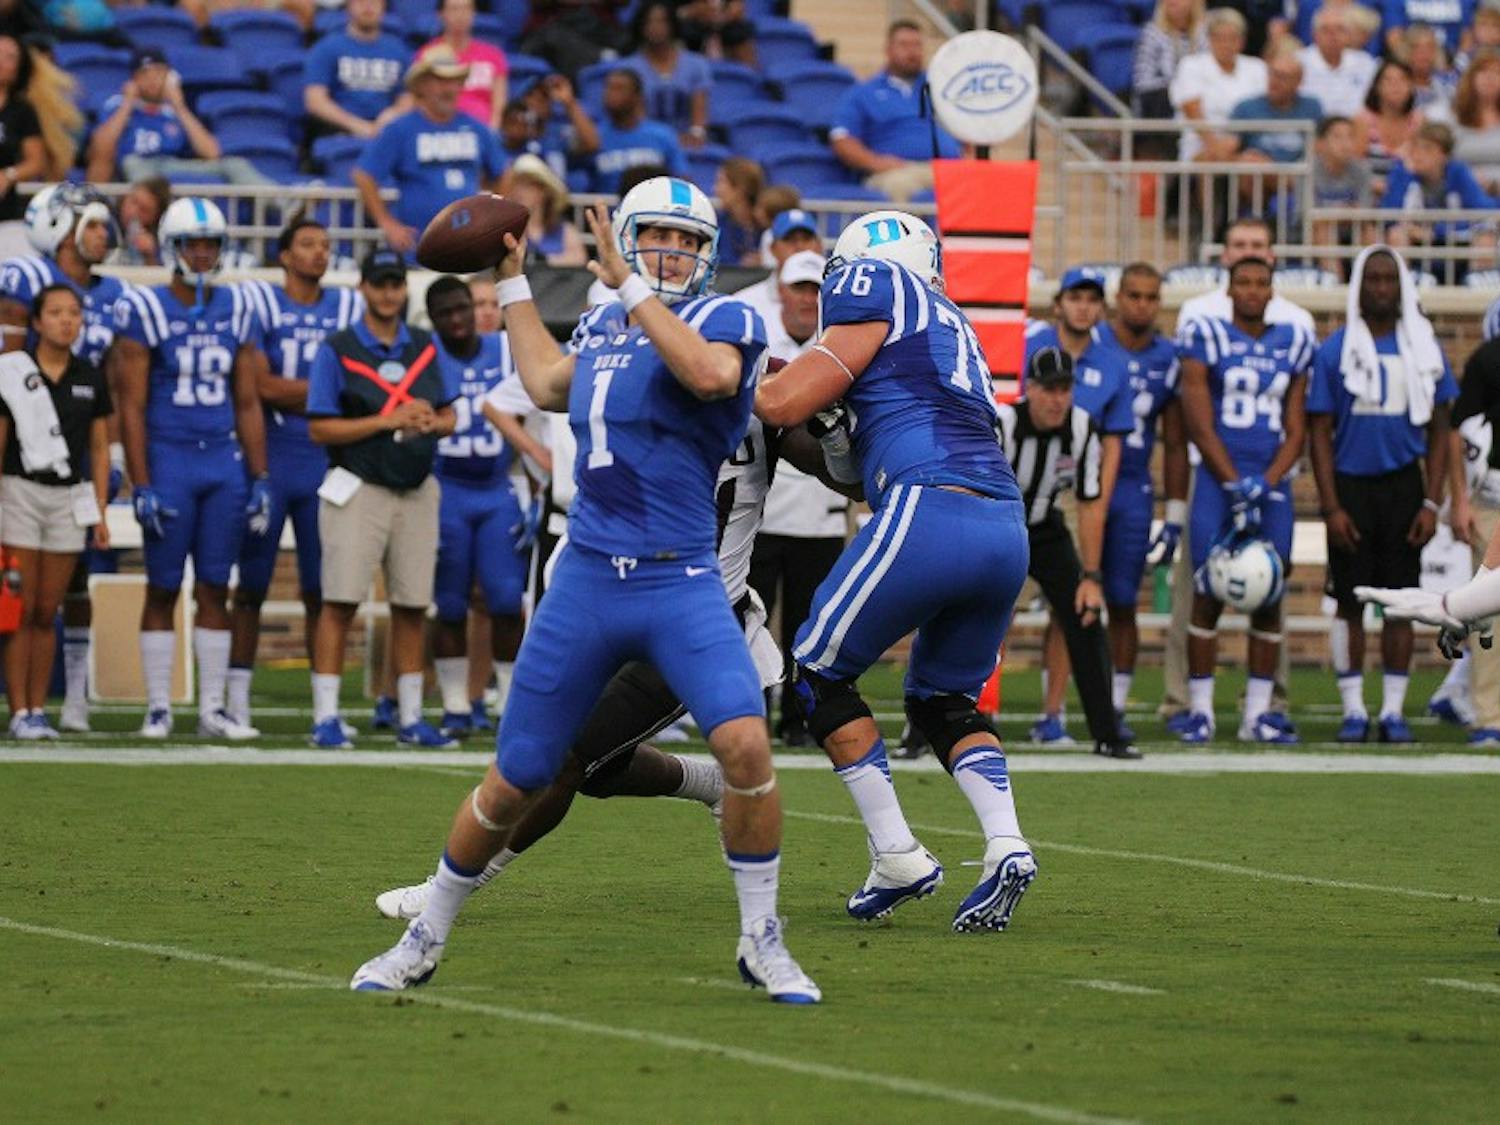 Quarterback Thomas Sirk has impressed in his first two starts, but will need to attack a Northwestern secondary that picked off 15 passes last season to push the Blue Devils’ record to 3-0.